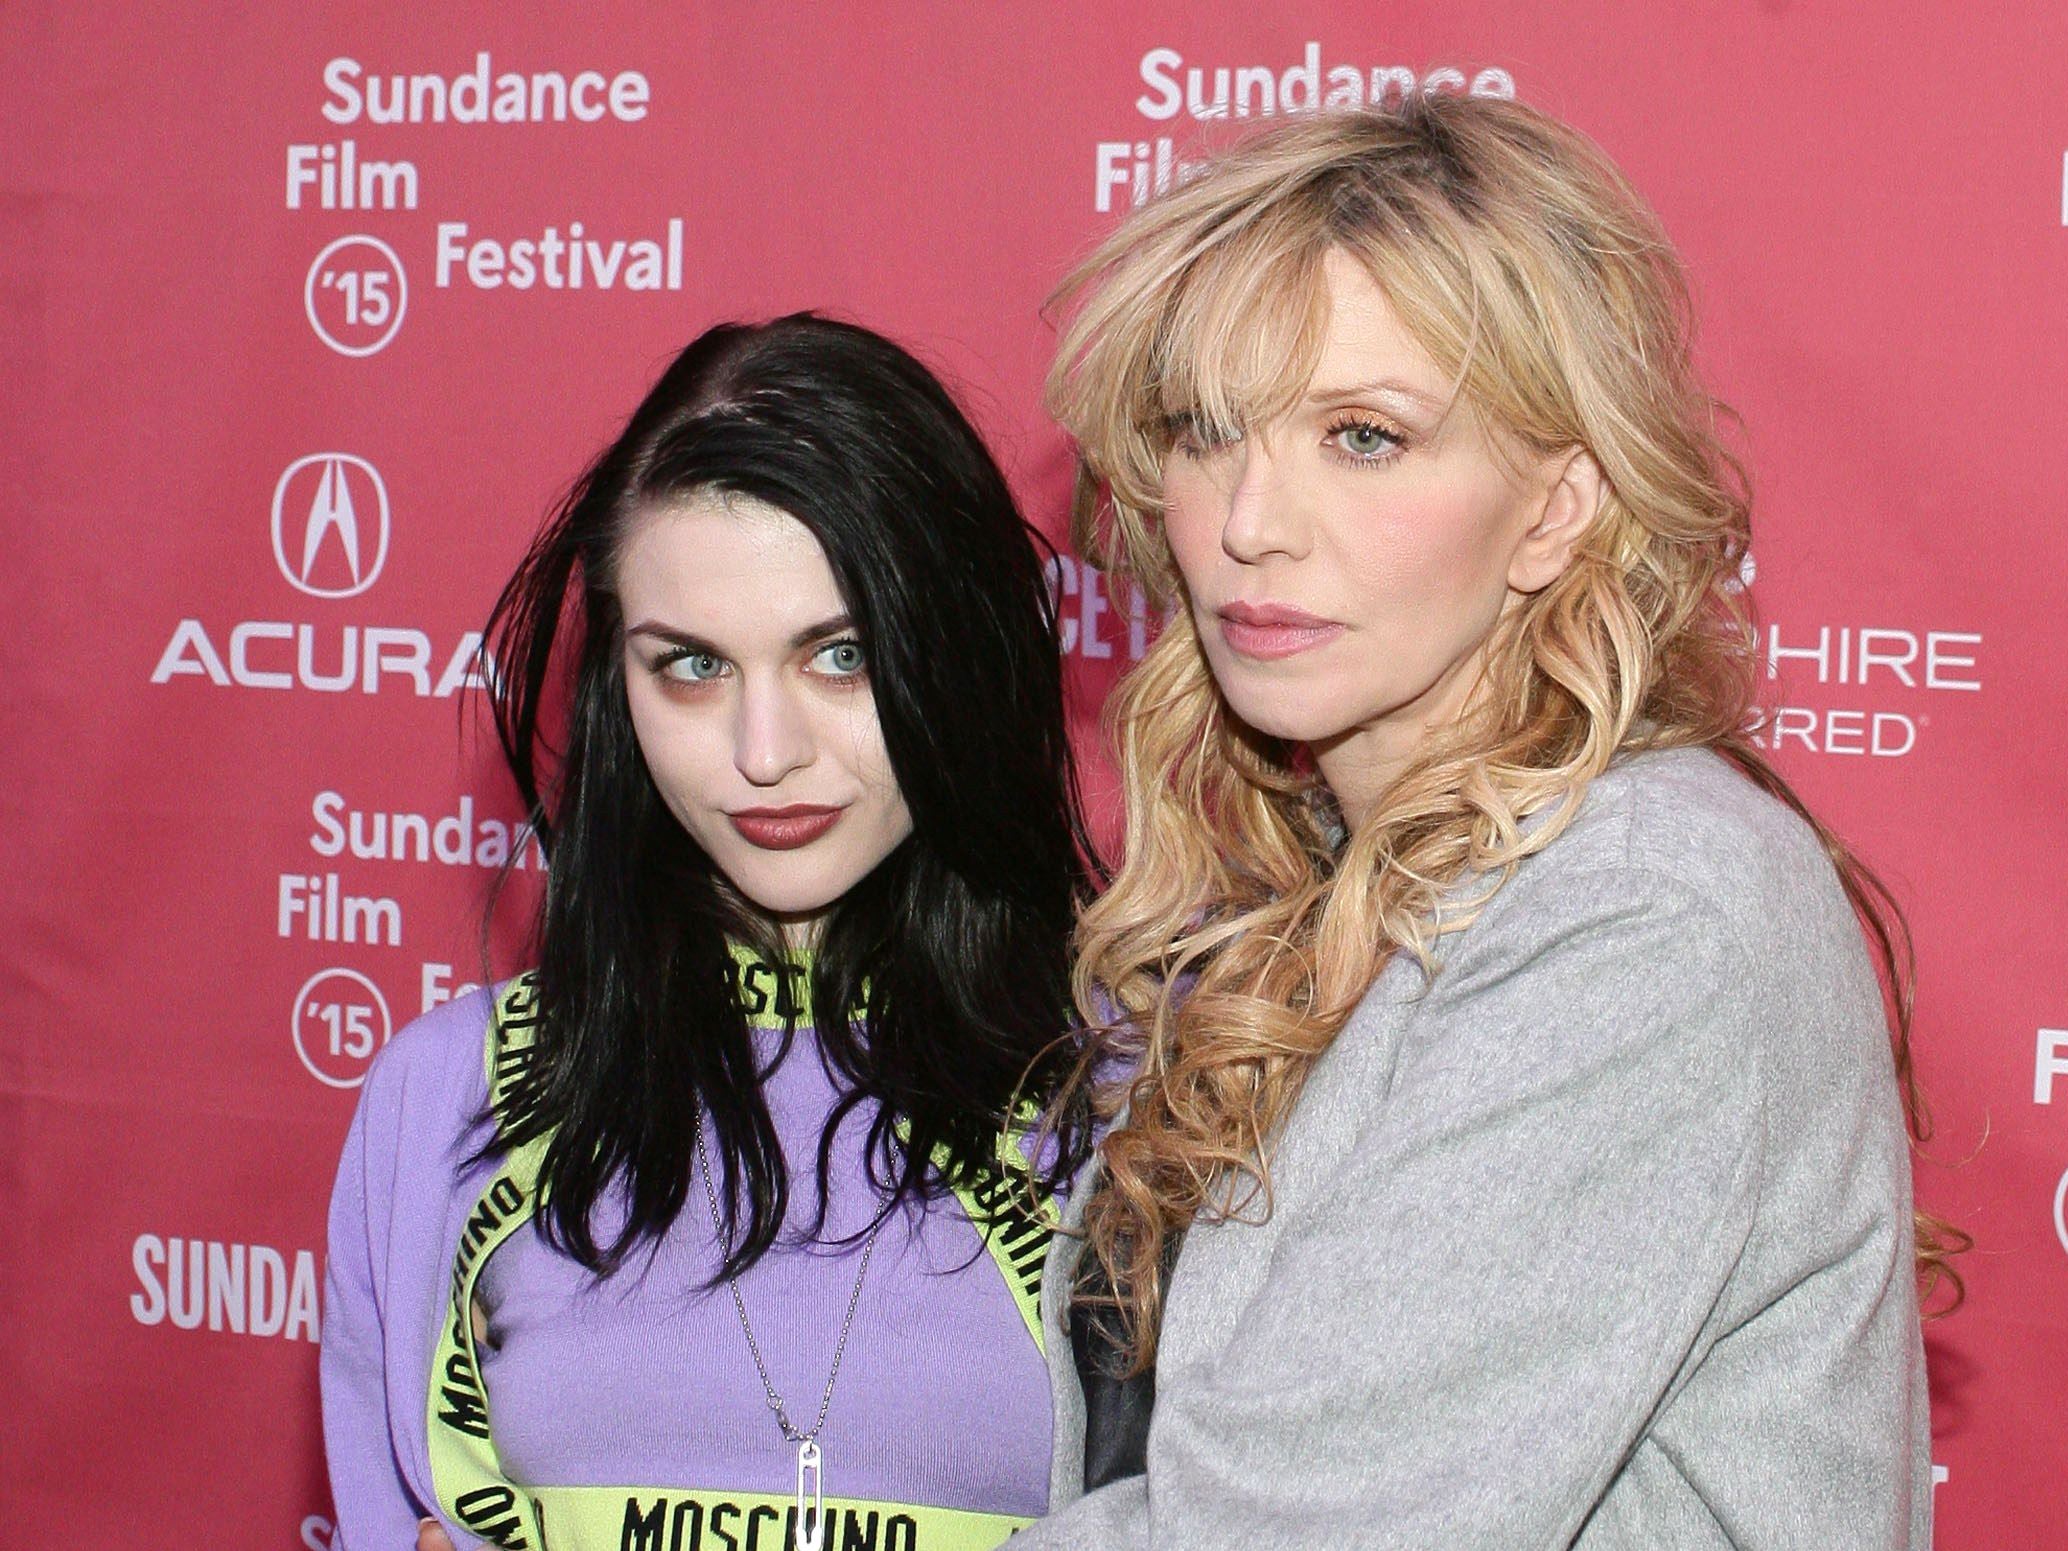 Courtney Love has admitted using heroin while pregnant with Frances Bean Cobain, her daughter with Kurt Cobain